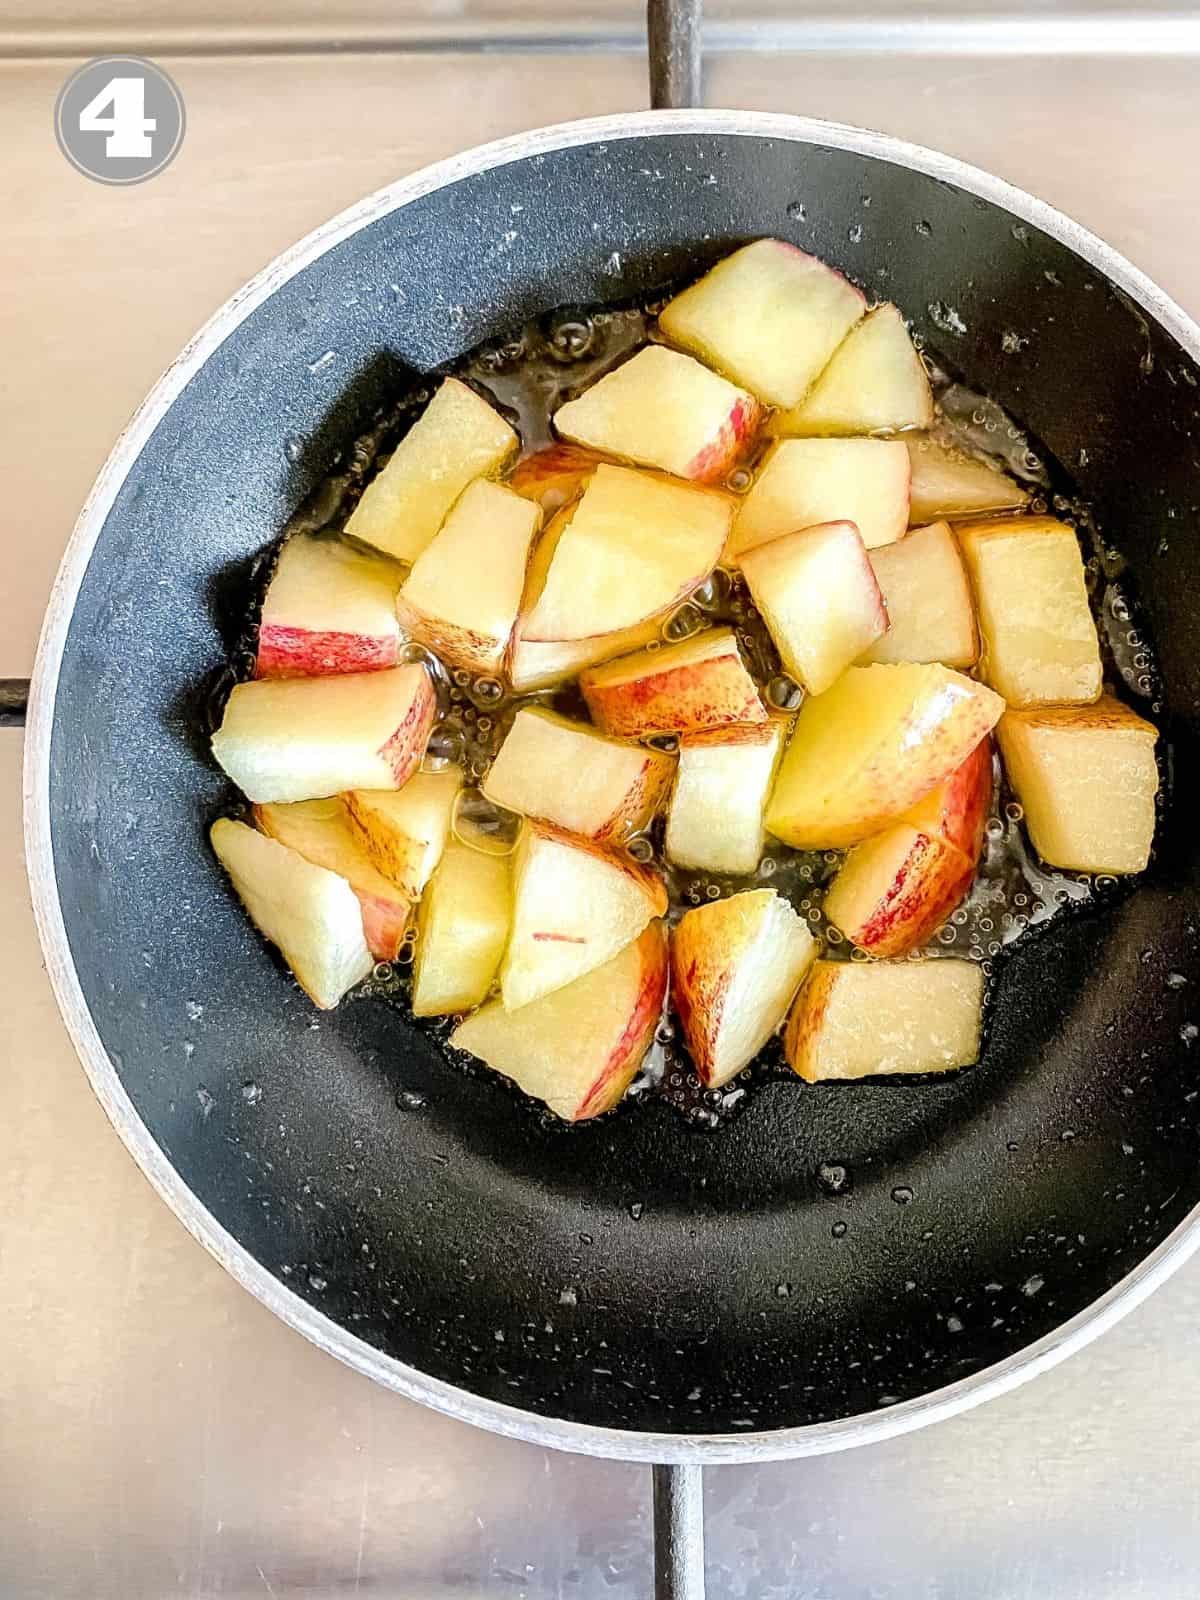 cubed apple pieces in a black pan.